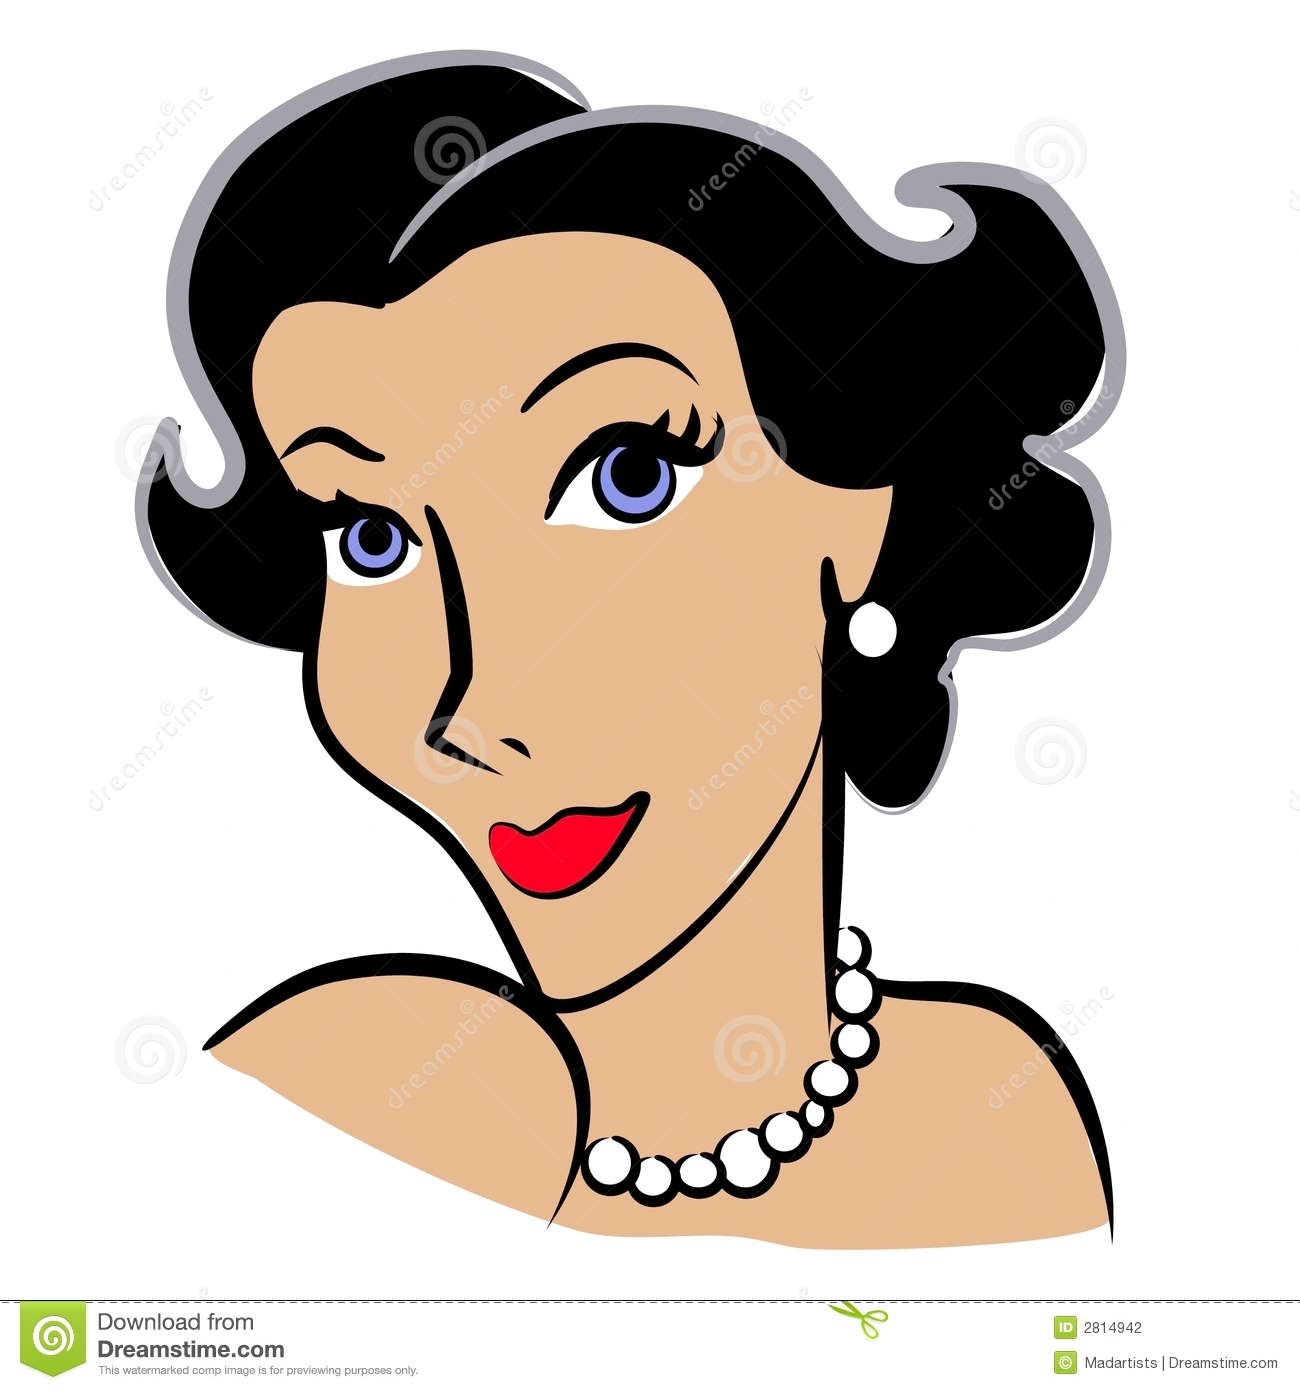 free clipart images woman - photo #38